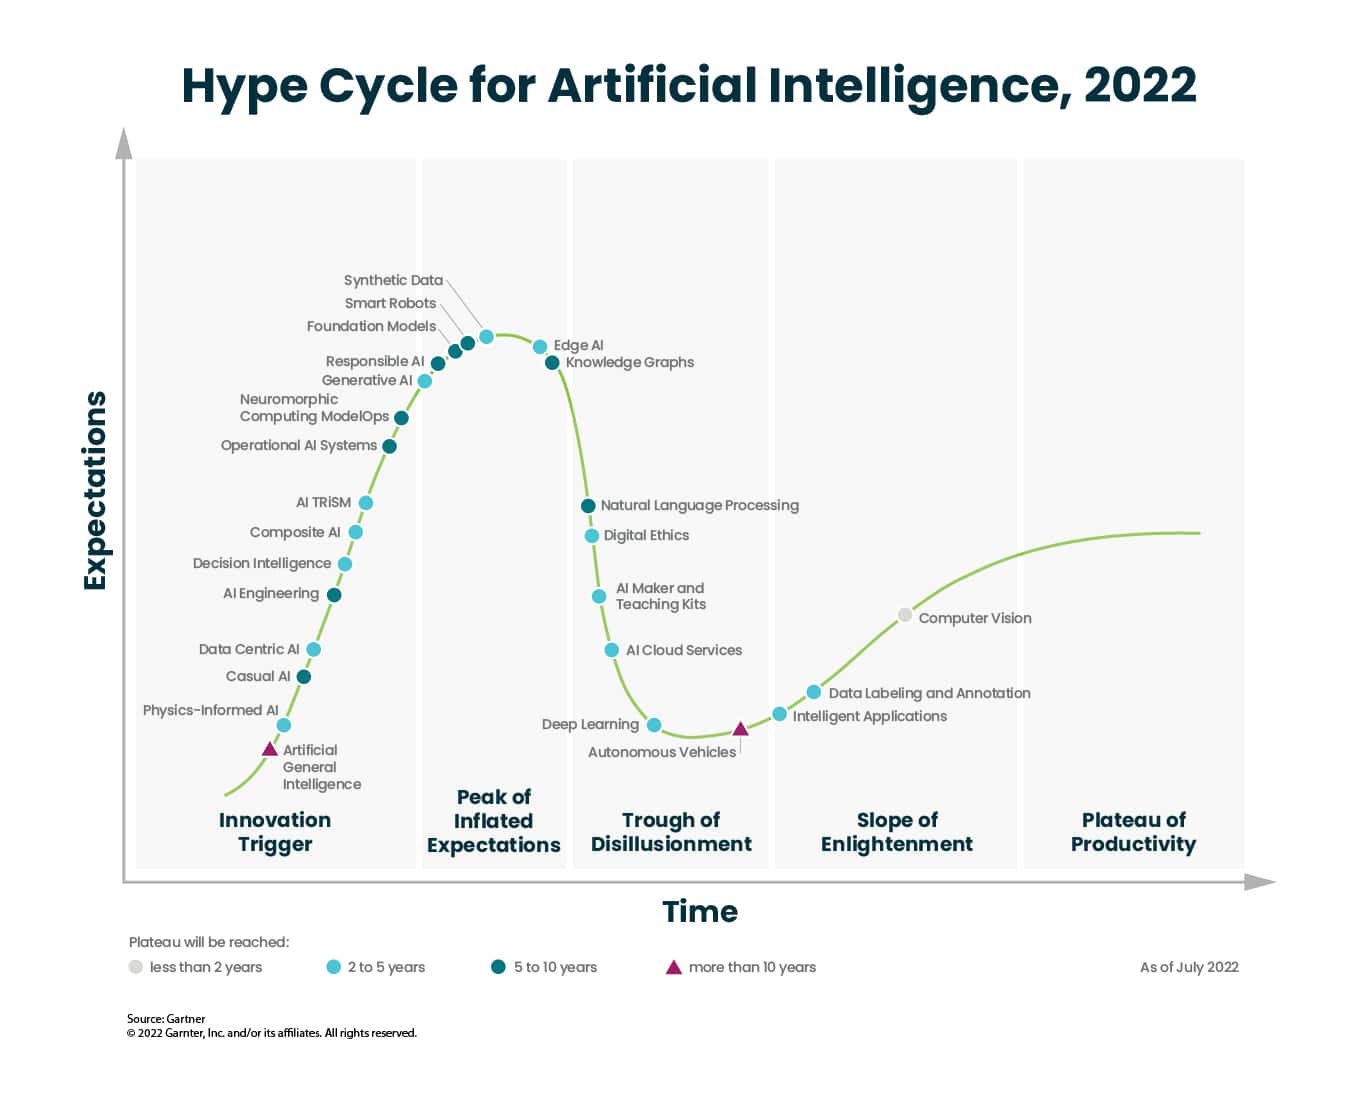 More than hype: decision support AI is set for widespread adoption in the short term.